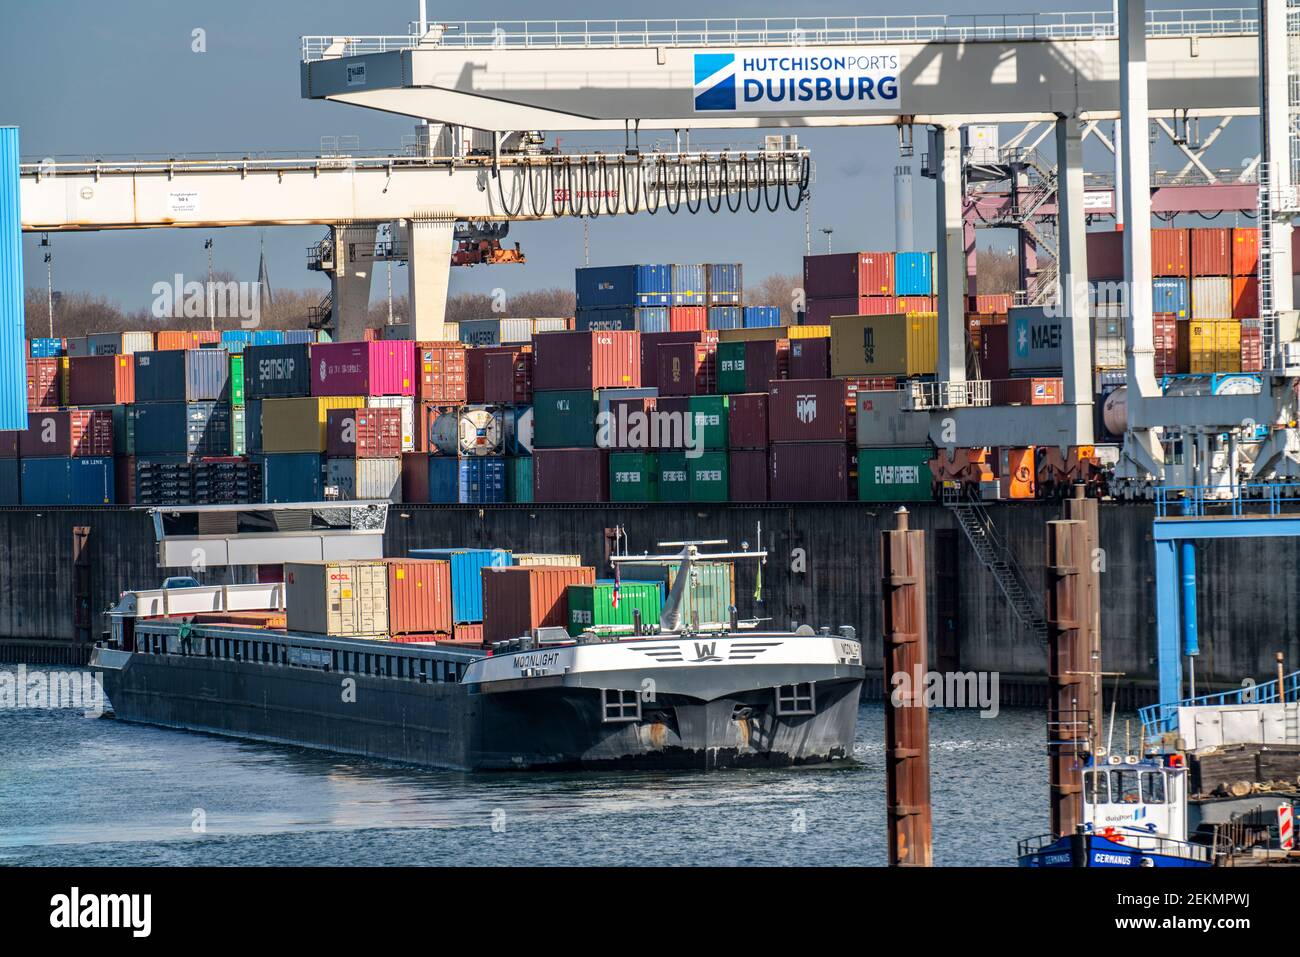 Port of Duisburg Ruhrort, container cargo ship being loaded and unloaded at DeCeTe, Duisburg Container Terminal, Duisport, Duisburger Hafen AG, Duisbu Stock Photo